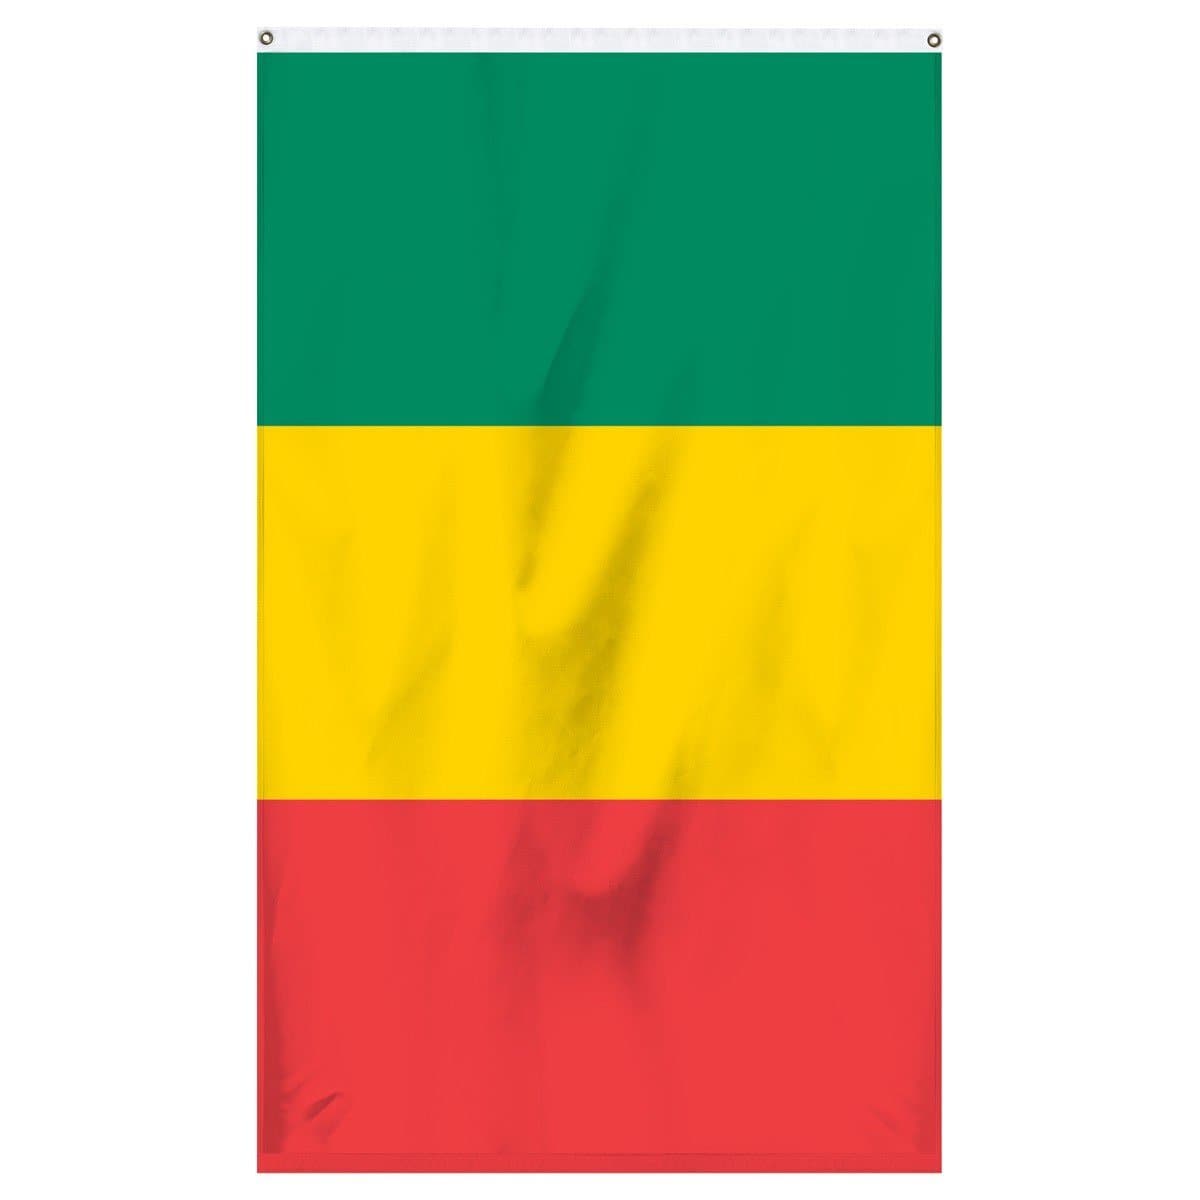 Mali national flag for sale to buy online now